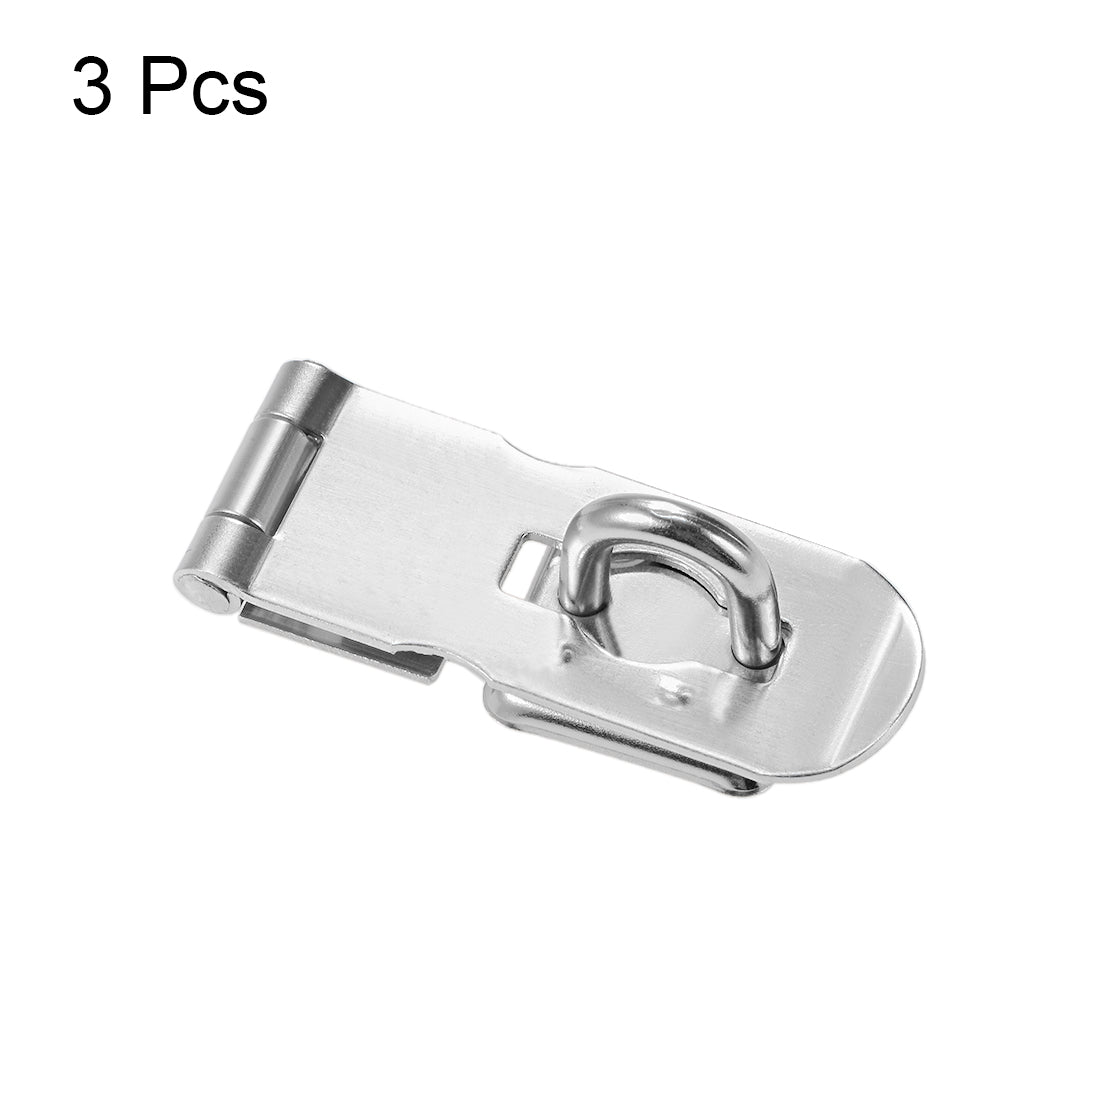 uxcell Uxcell Padlock Hasp Door Clasp Hasp Latch Security Safety Bolt Lock Latches 3-inch Stainless Steel 3pcs